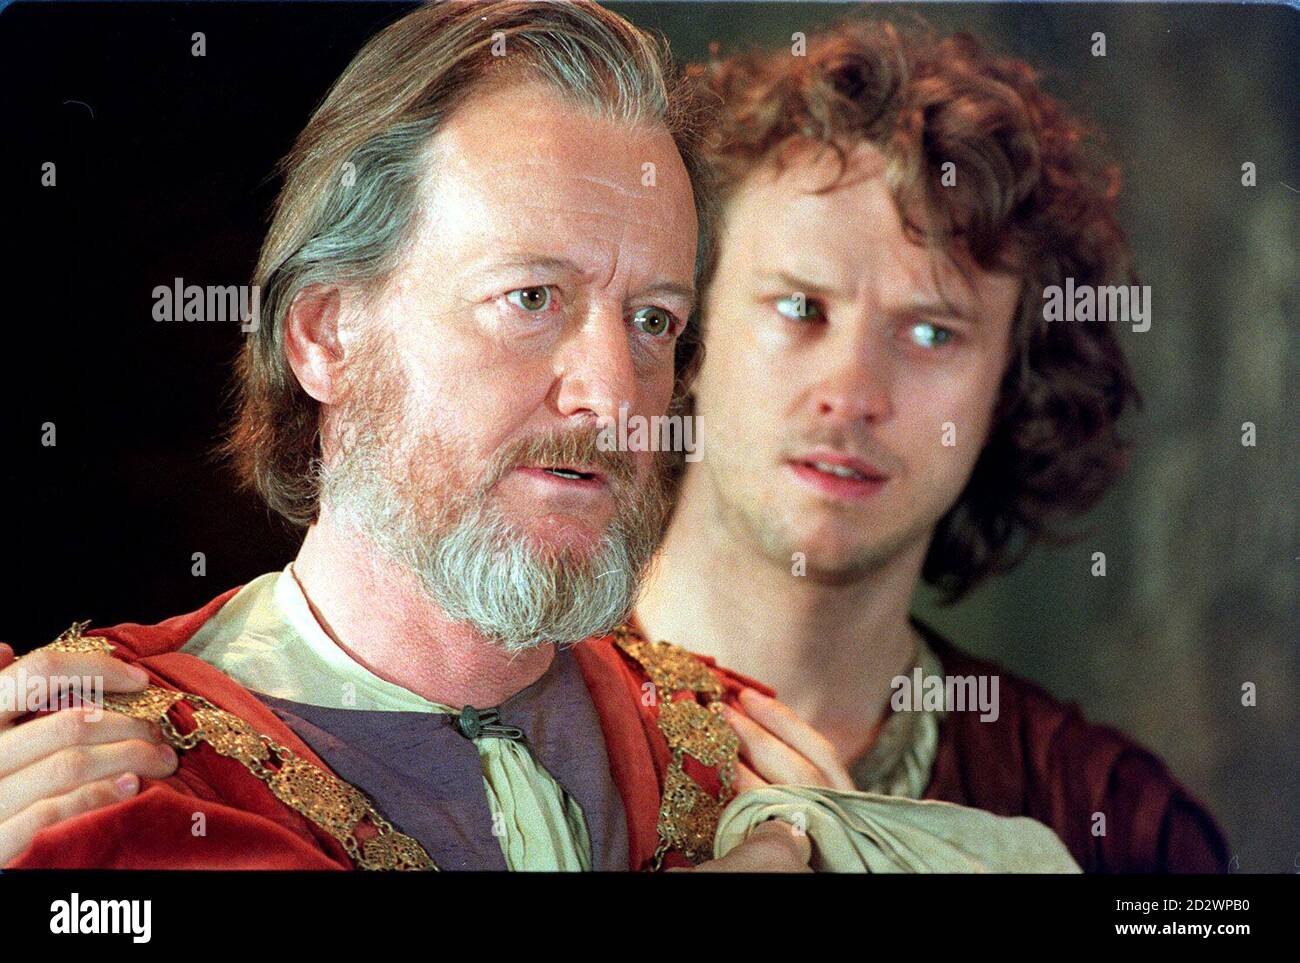 (L-R) Ronald Pickup as King Henry IV with Jonathon Firth as Hal, at a London photocall to for the BBC's new adaptation of Shakespeare's Henry IV. The play, which has been adatpted for TV by John Caird, wil be shown on BBC 2 at a date to be announced this autumn. Stock Photo